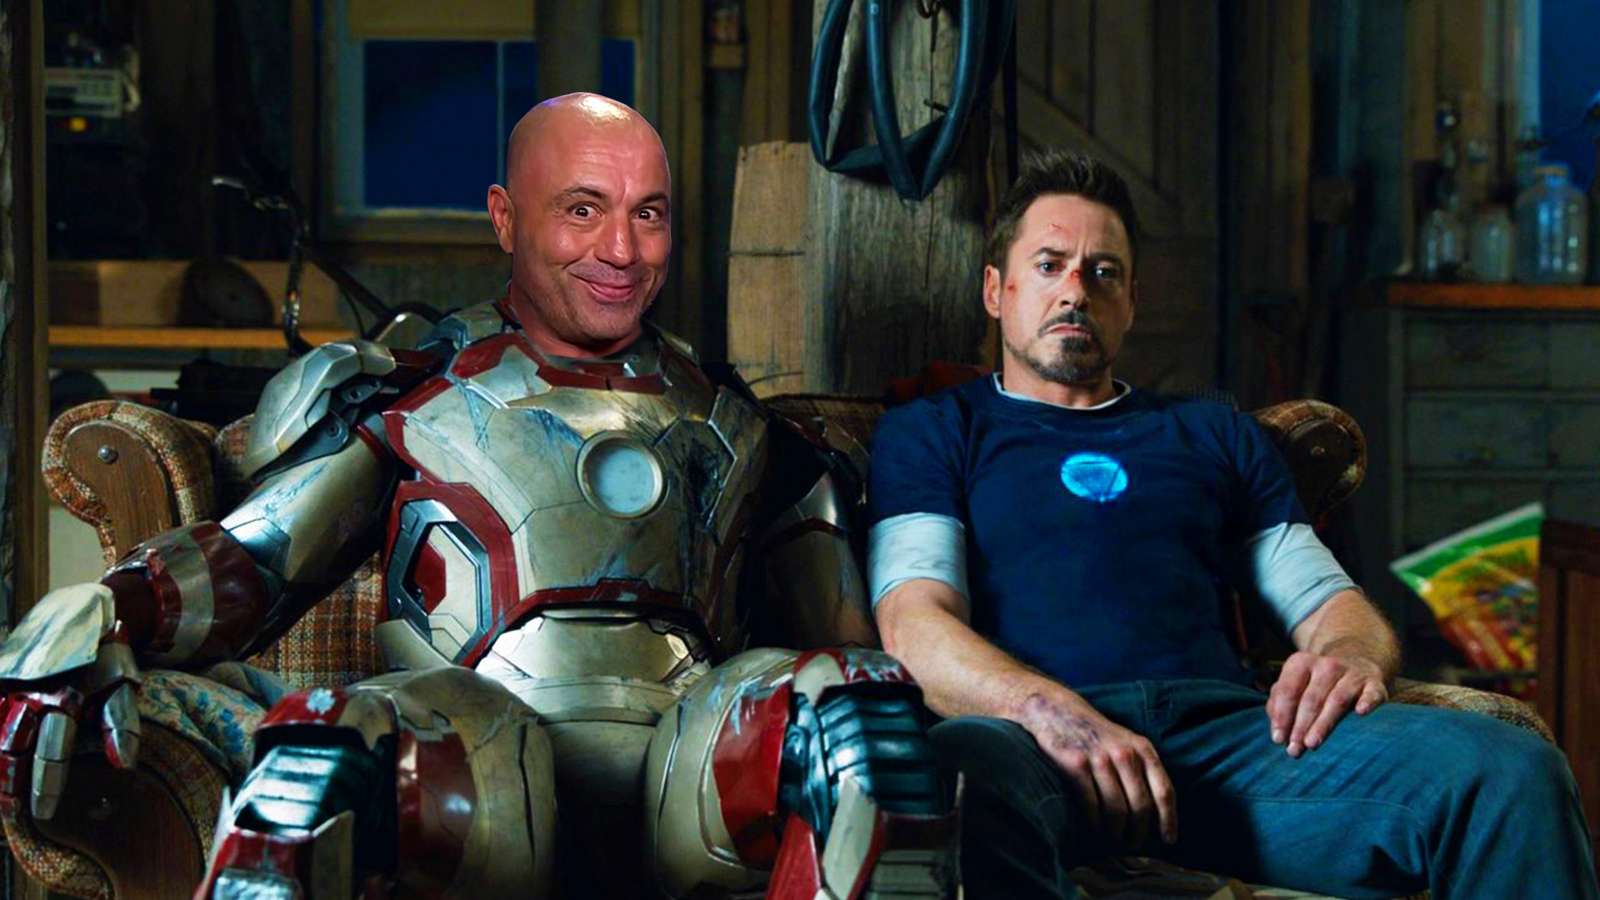 Joe Rogan as Ironman and Robert Downey Jr on a couch